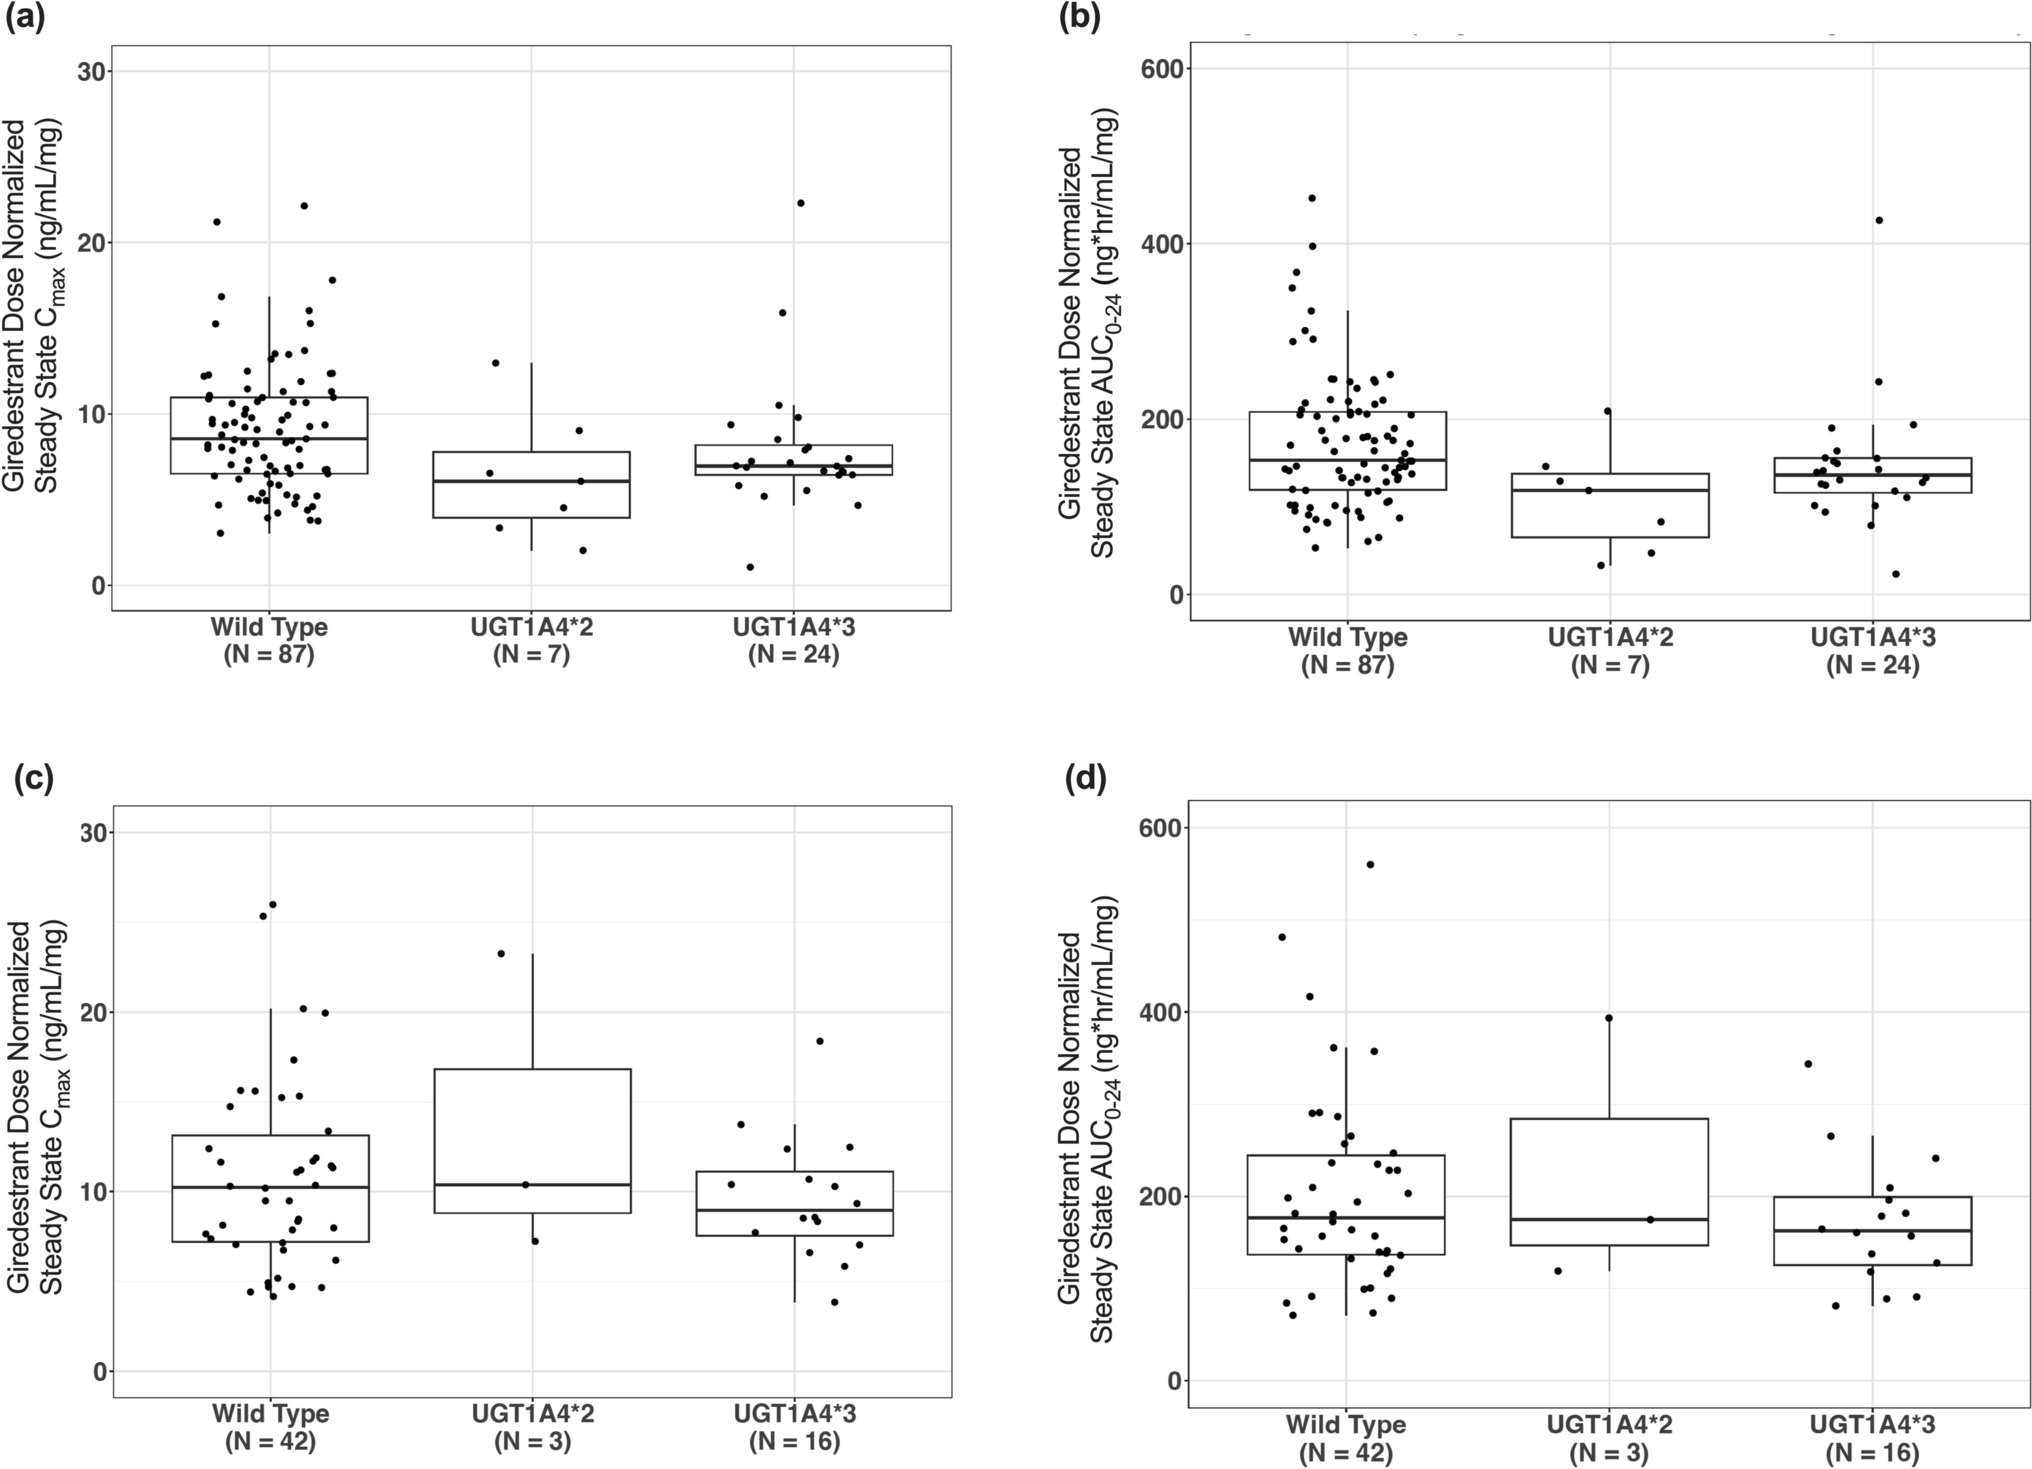 UGT1A4 Polymorphism is not Associated with a Clinically Relevant Change in Giredestrant Exposure